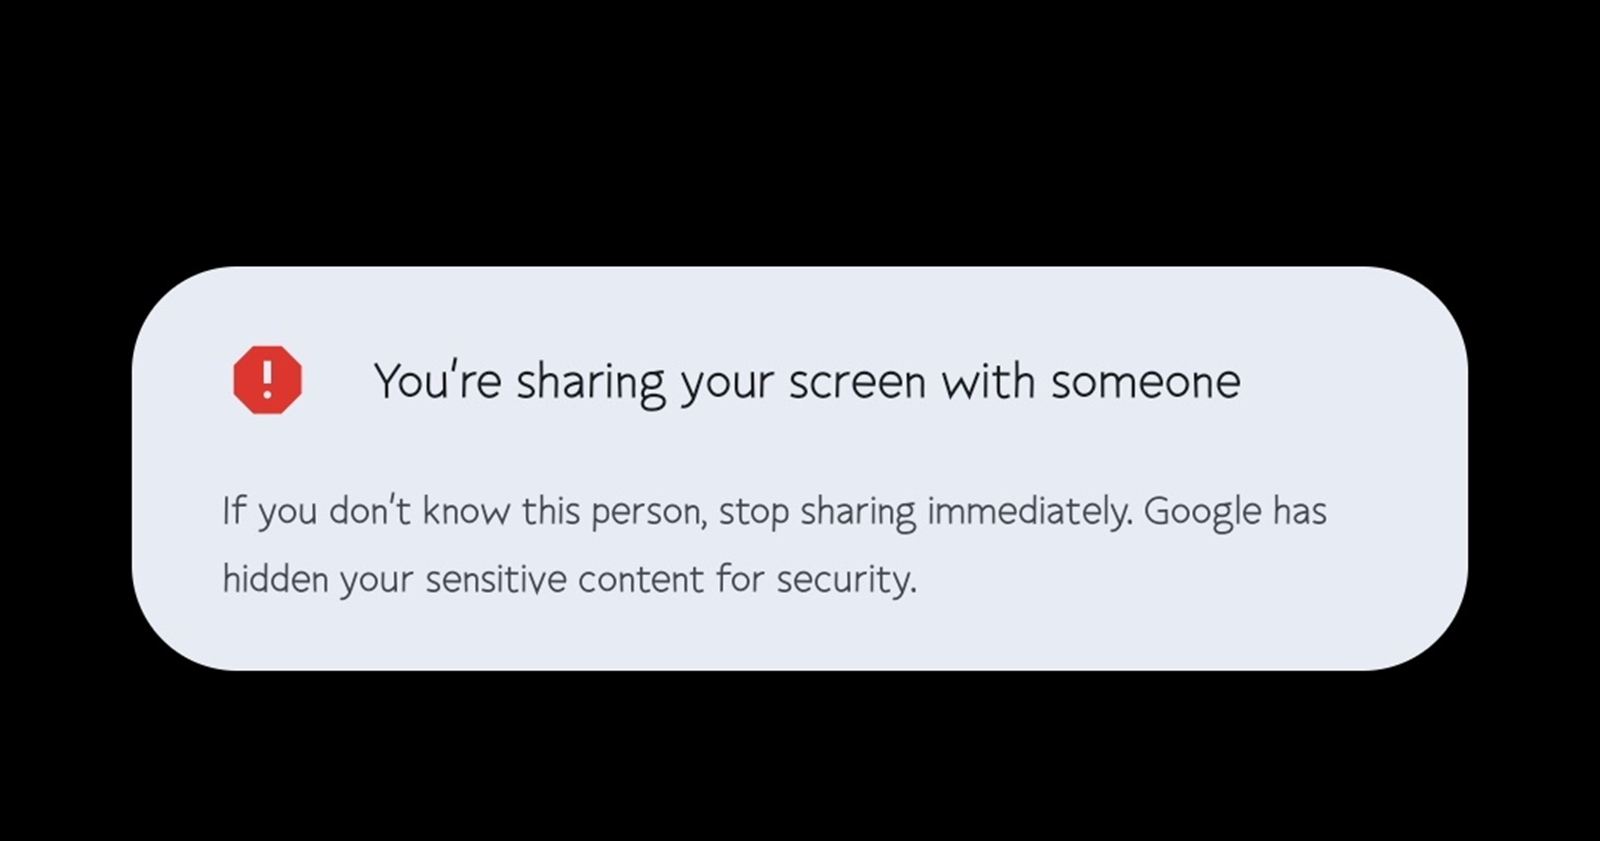 Google Messages 'You're sharing screen with someone' warning leaves many users puzzled (potential workarounds)